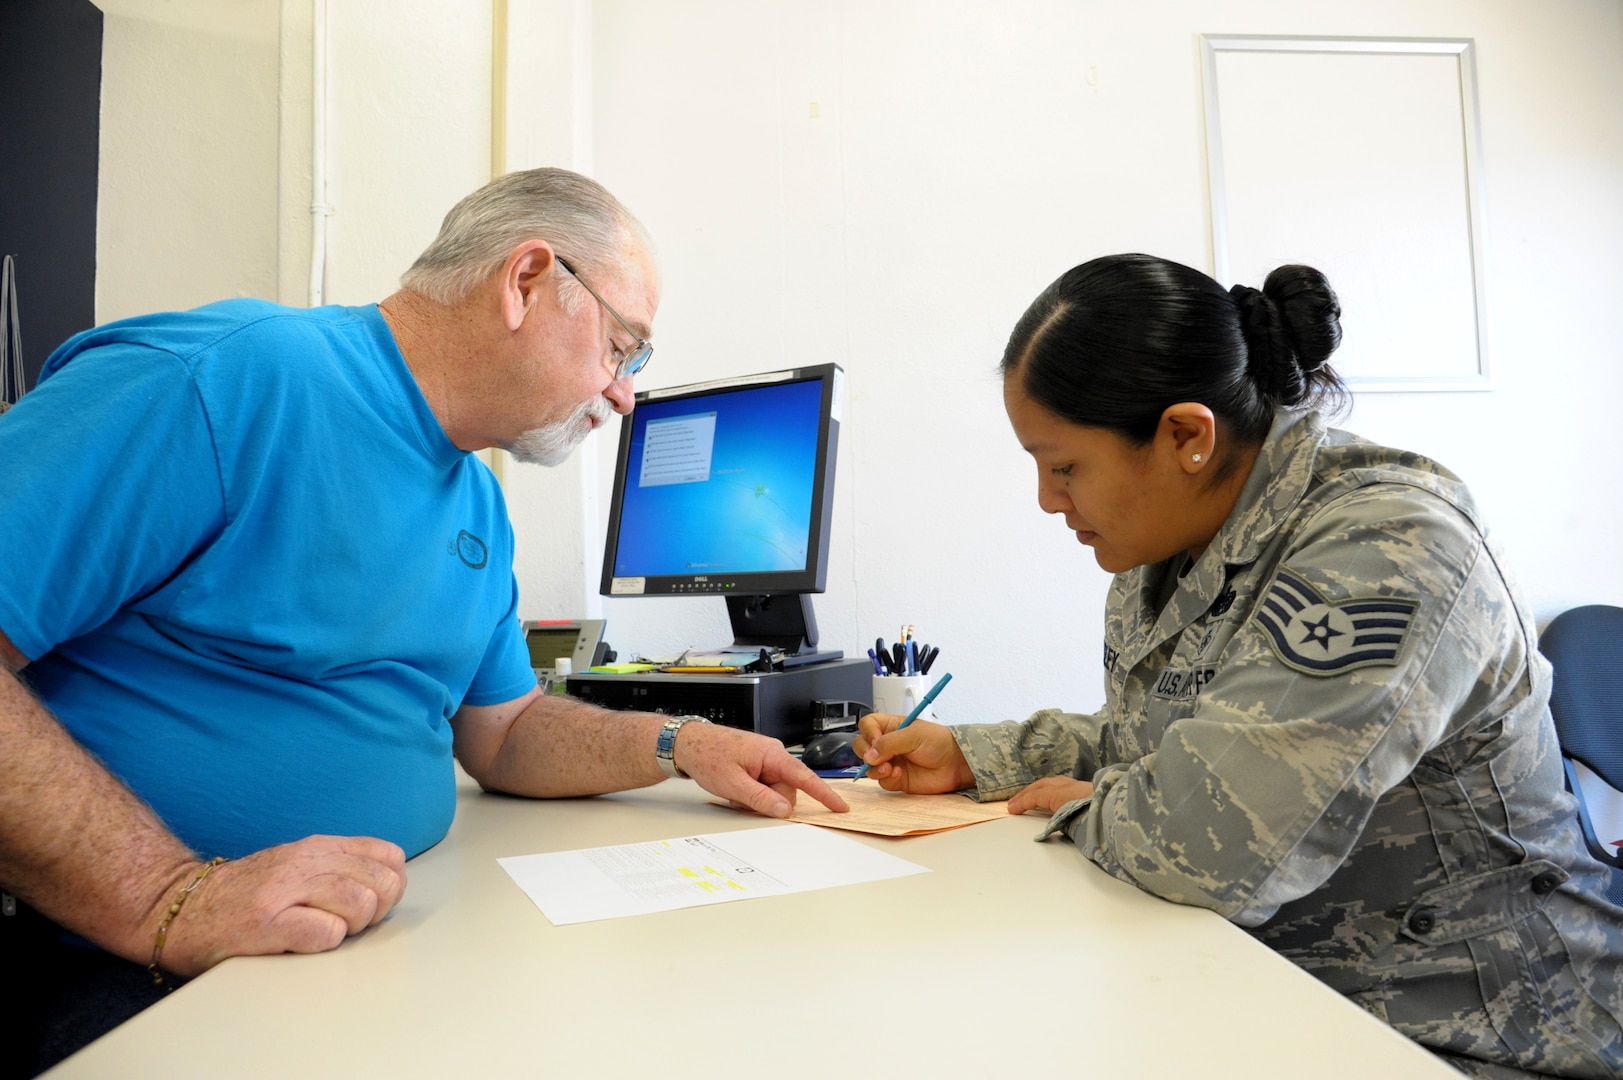 LaMarr Queen, Joint Base San Antonio-Randolph Tax Center coordinator, assists Staff Sgt. Nelly Hensley, in preparing her 2015 income tax returns, Jan. 15, 2016. The tax office will help military members, retirees and family members complete their 2015 income tax returns before the April 15 deadline.  (U.S. Air Force photo by Joel Martinez/Released)